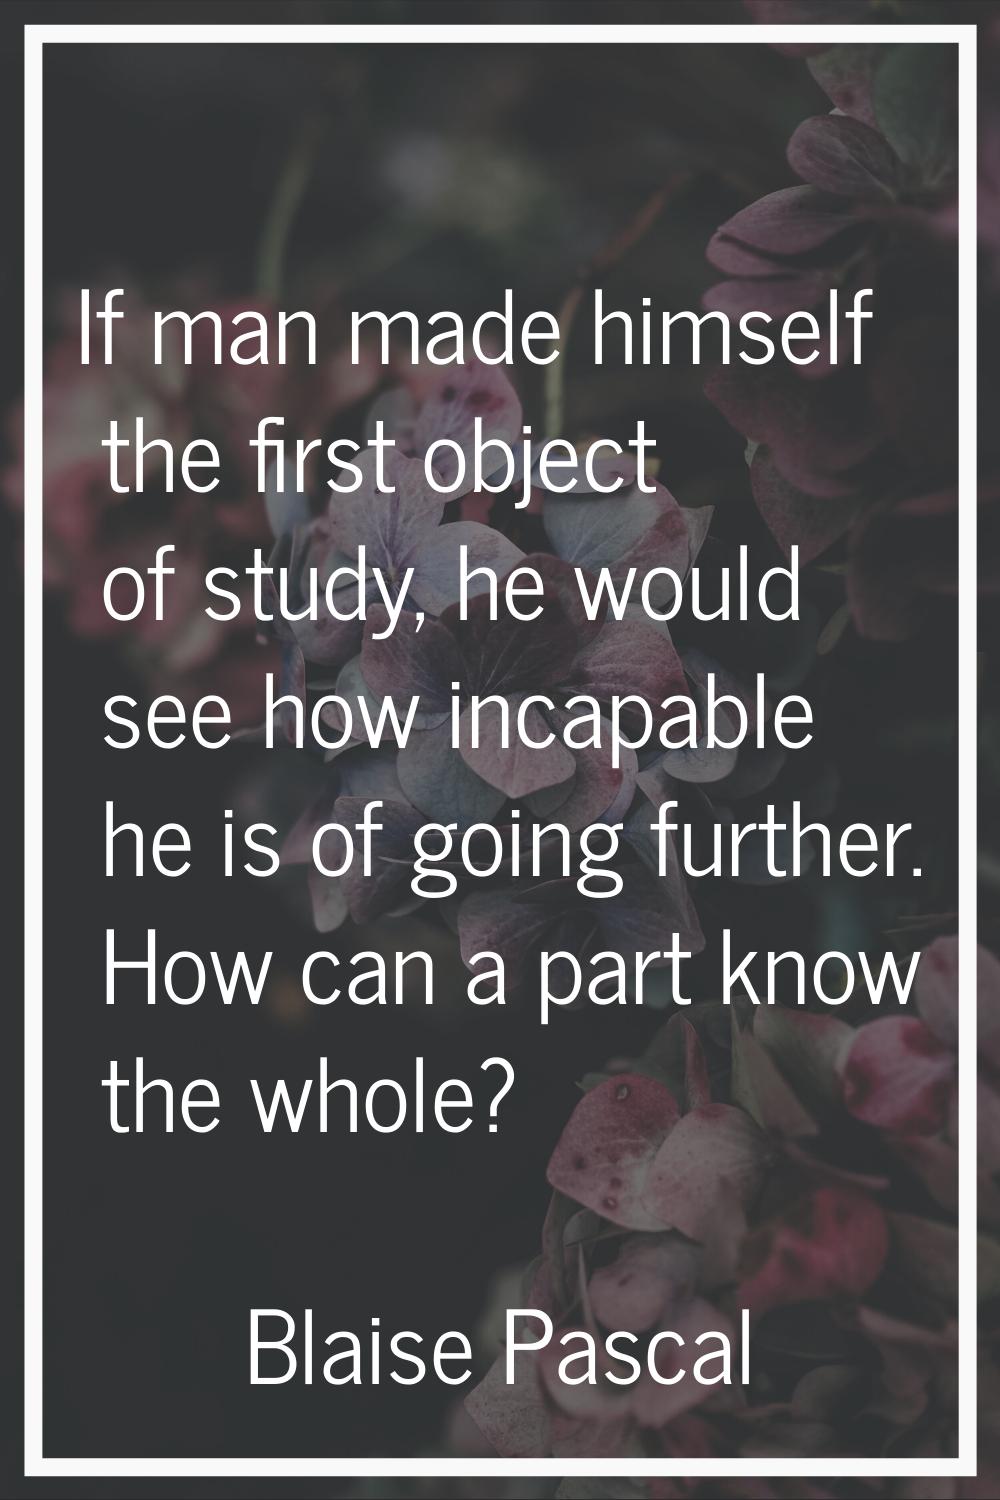 If man made himself the first object of study, he would see how incapable he is of going further. H